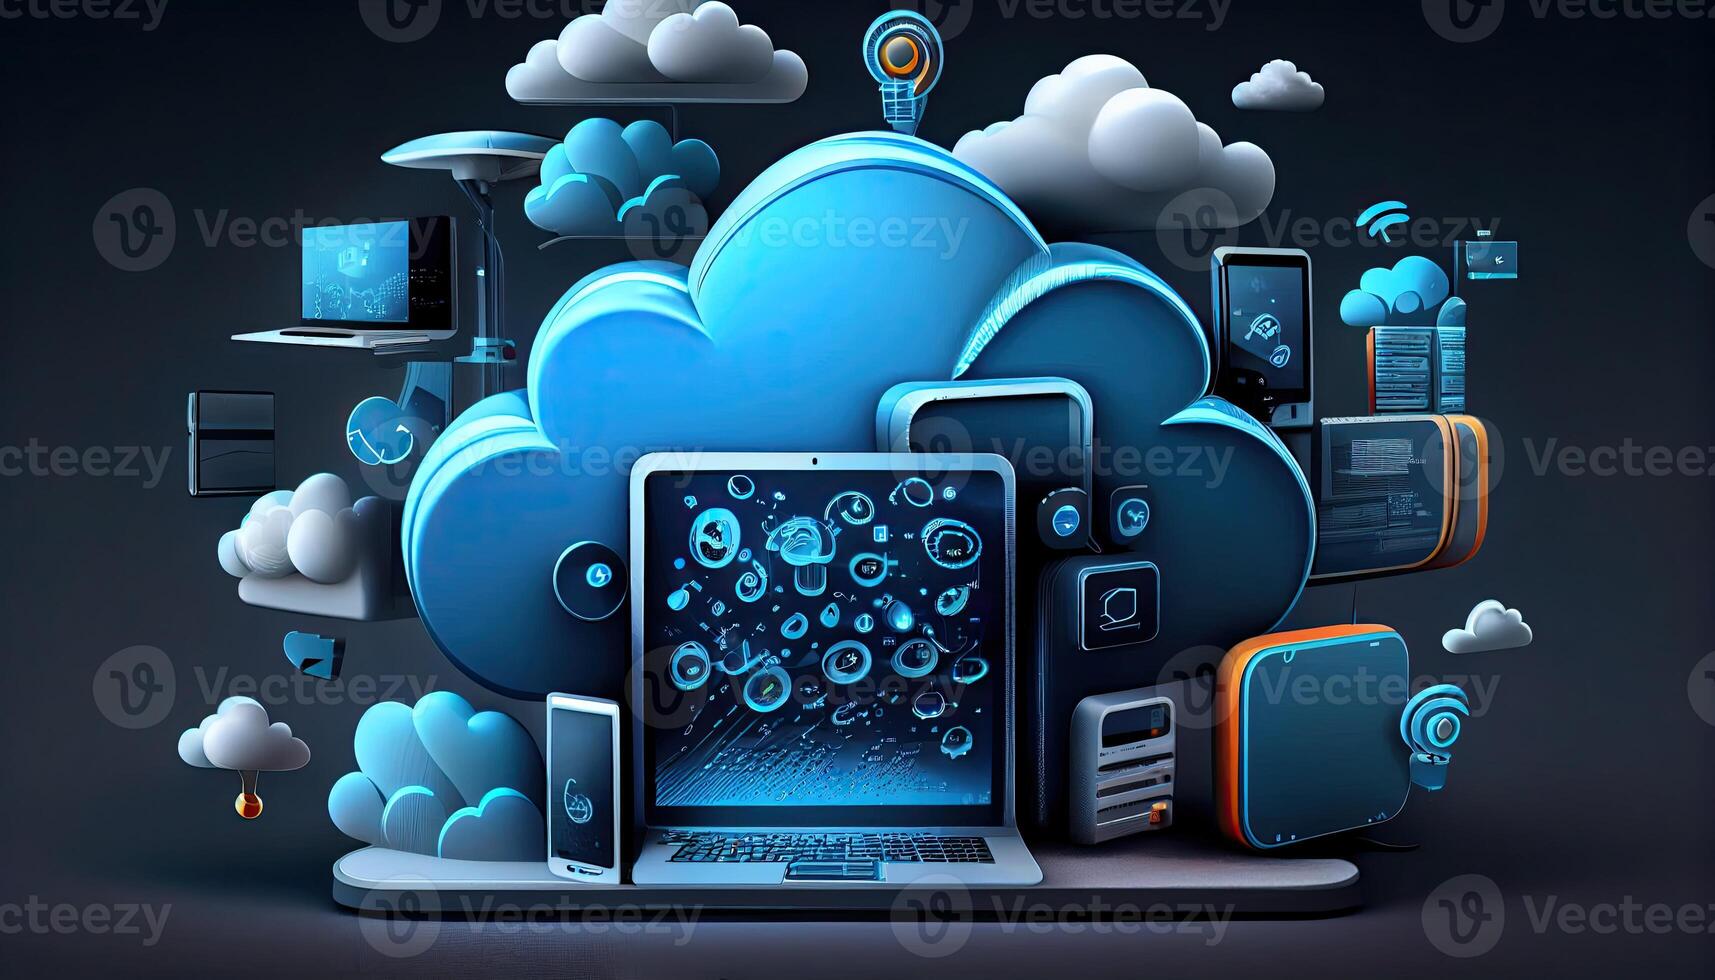 Cloud technology computing Devices connected to digital storage in the data center via the Internet IOT Smart Home Communication laptop tablet phone devices Businessman using Technology photo